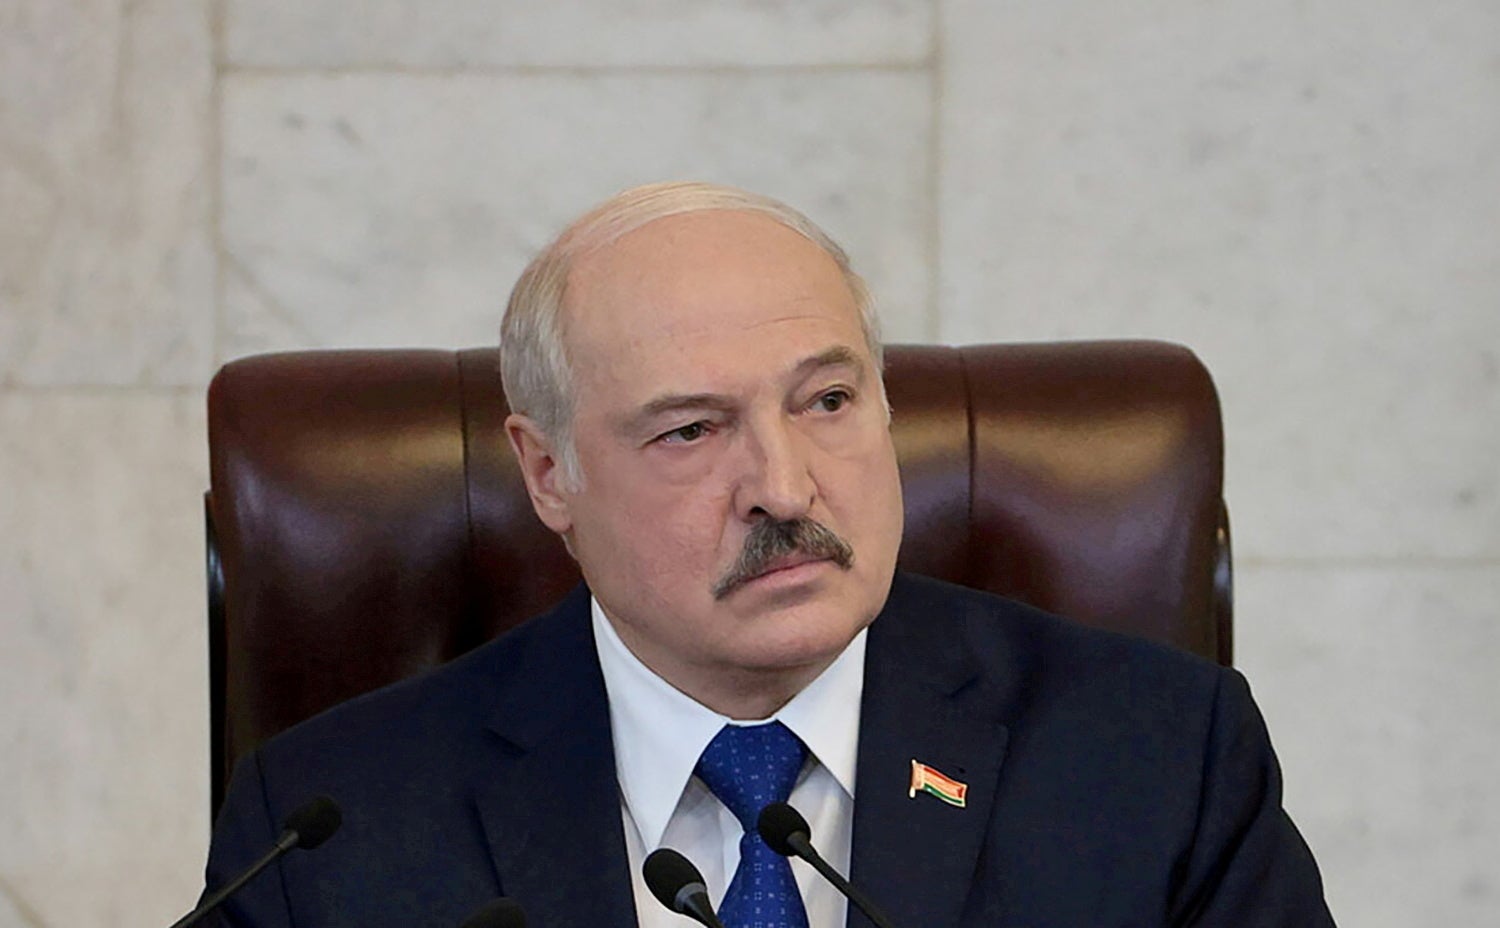 Belarusian President Alexander Lukashenko has cracked down on almost all forms of opposition